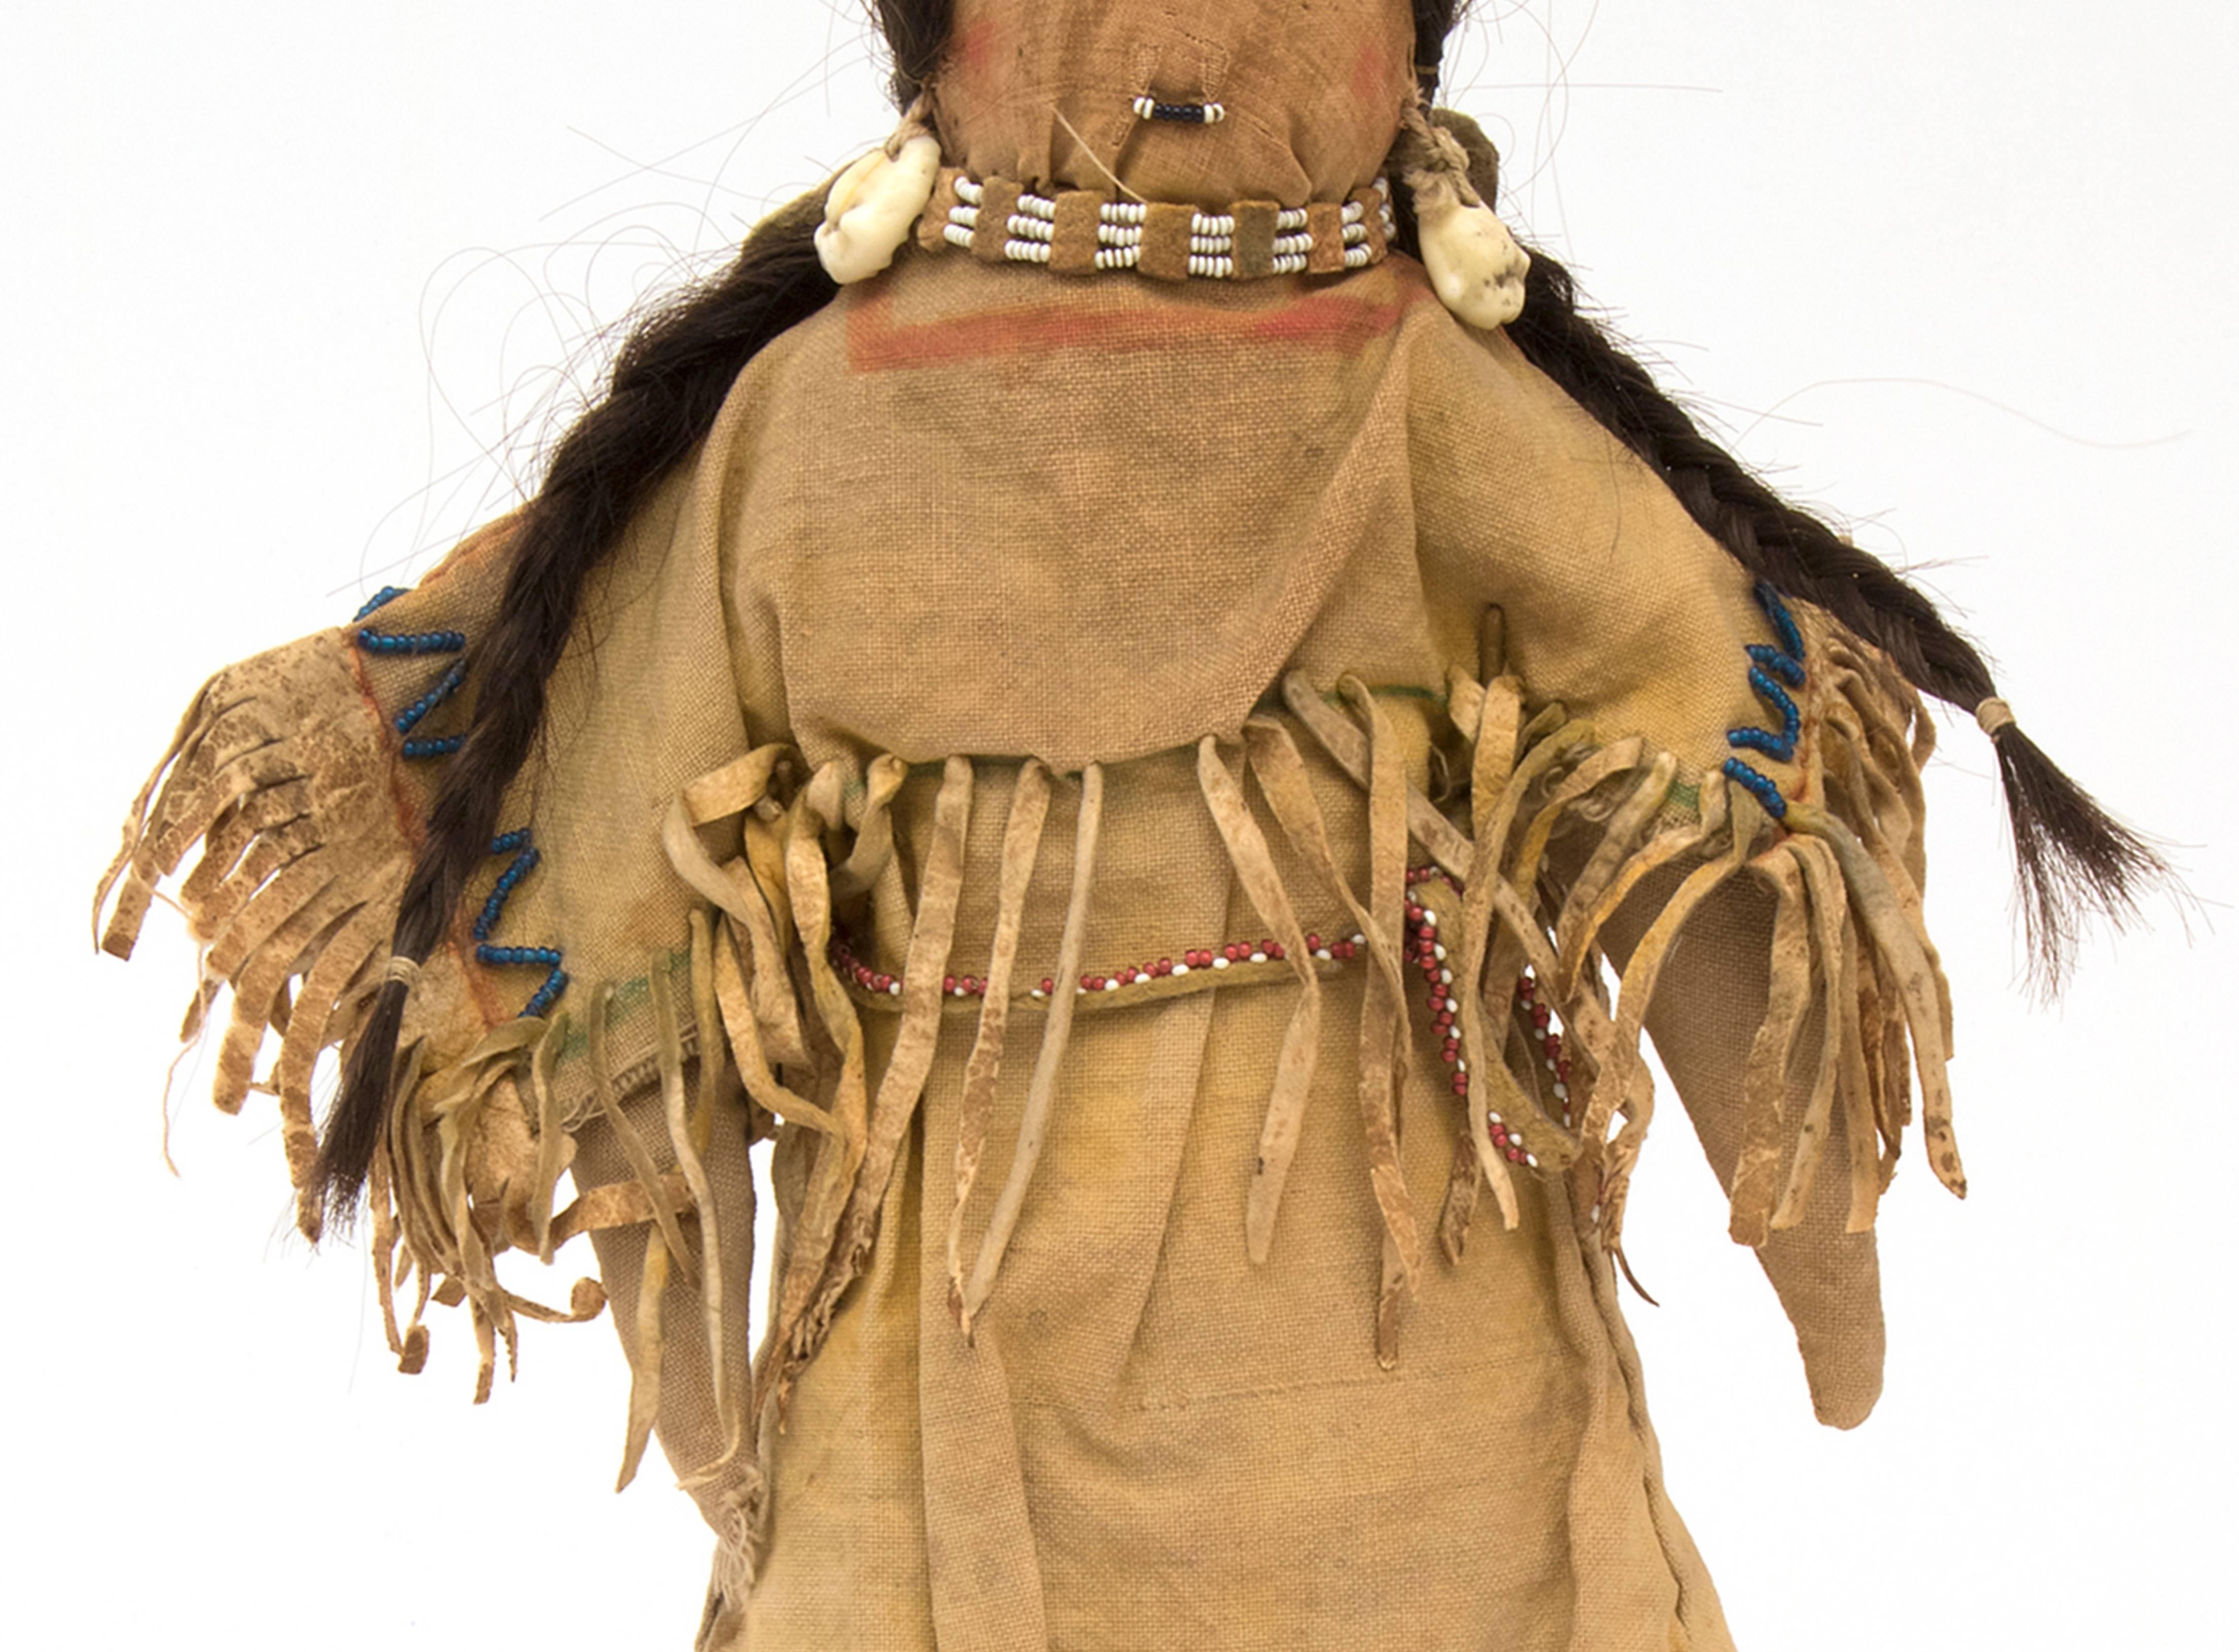 Beaded Antique Native American Doll, Southern Cheyenne (Plains), 19th Century